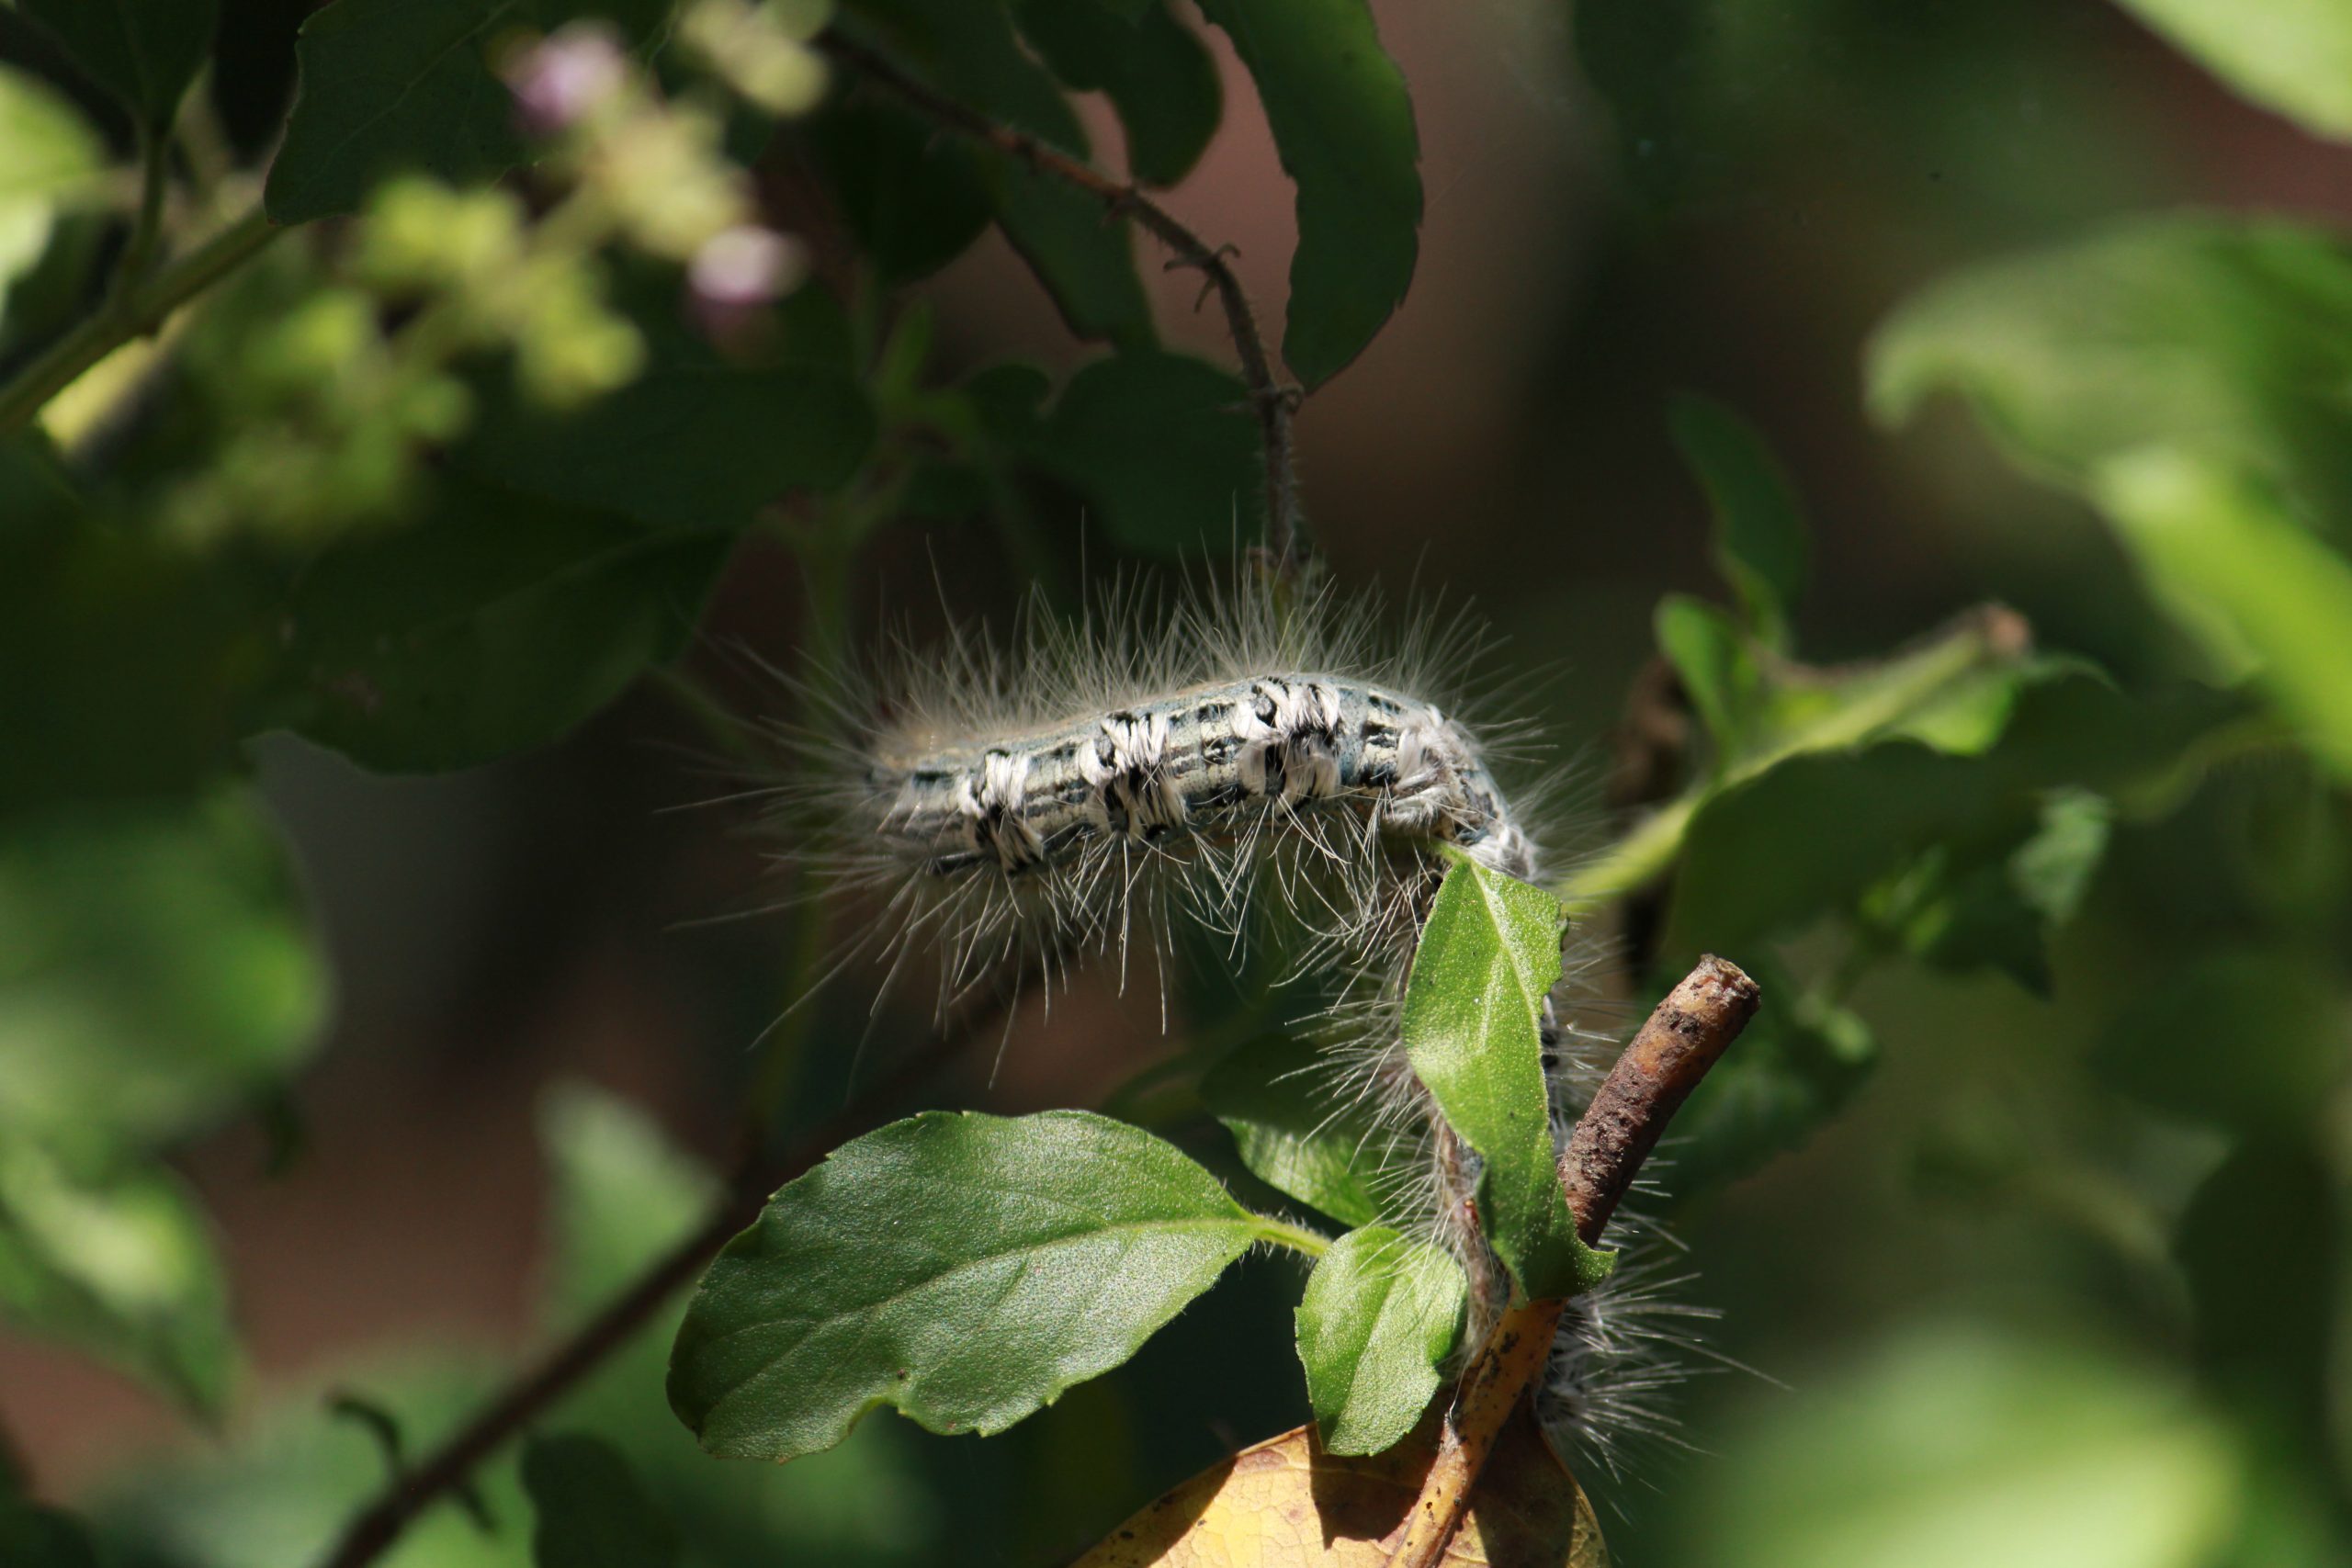 A thorny worm on a plant